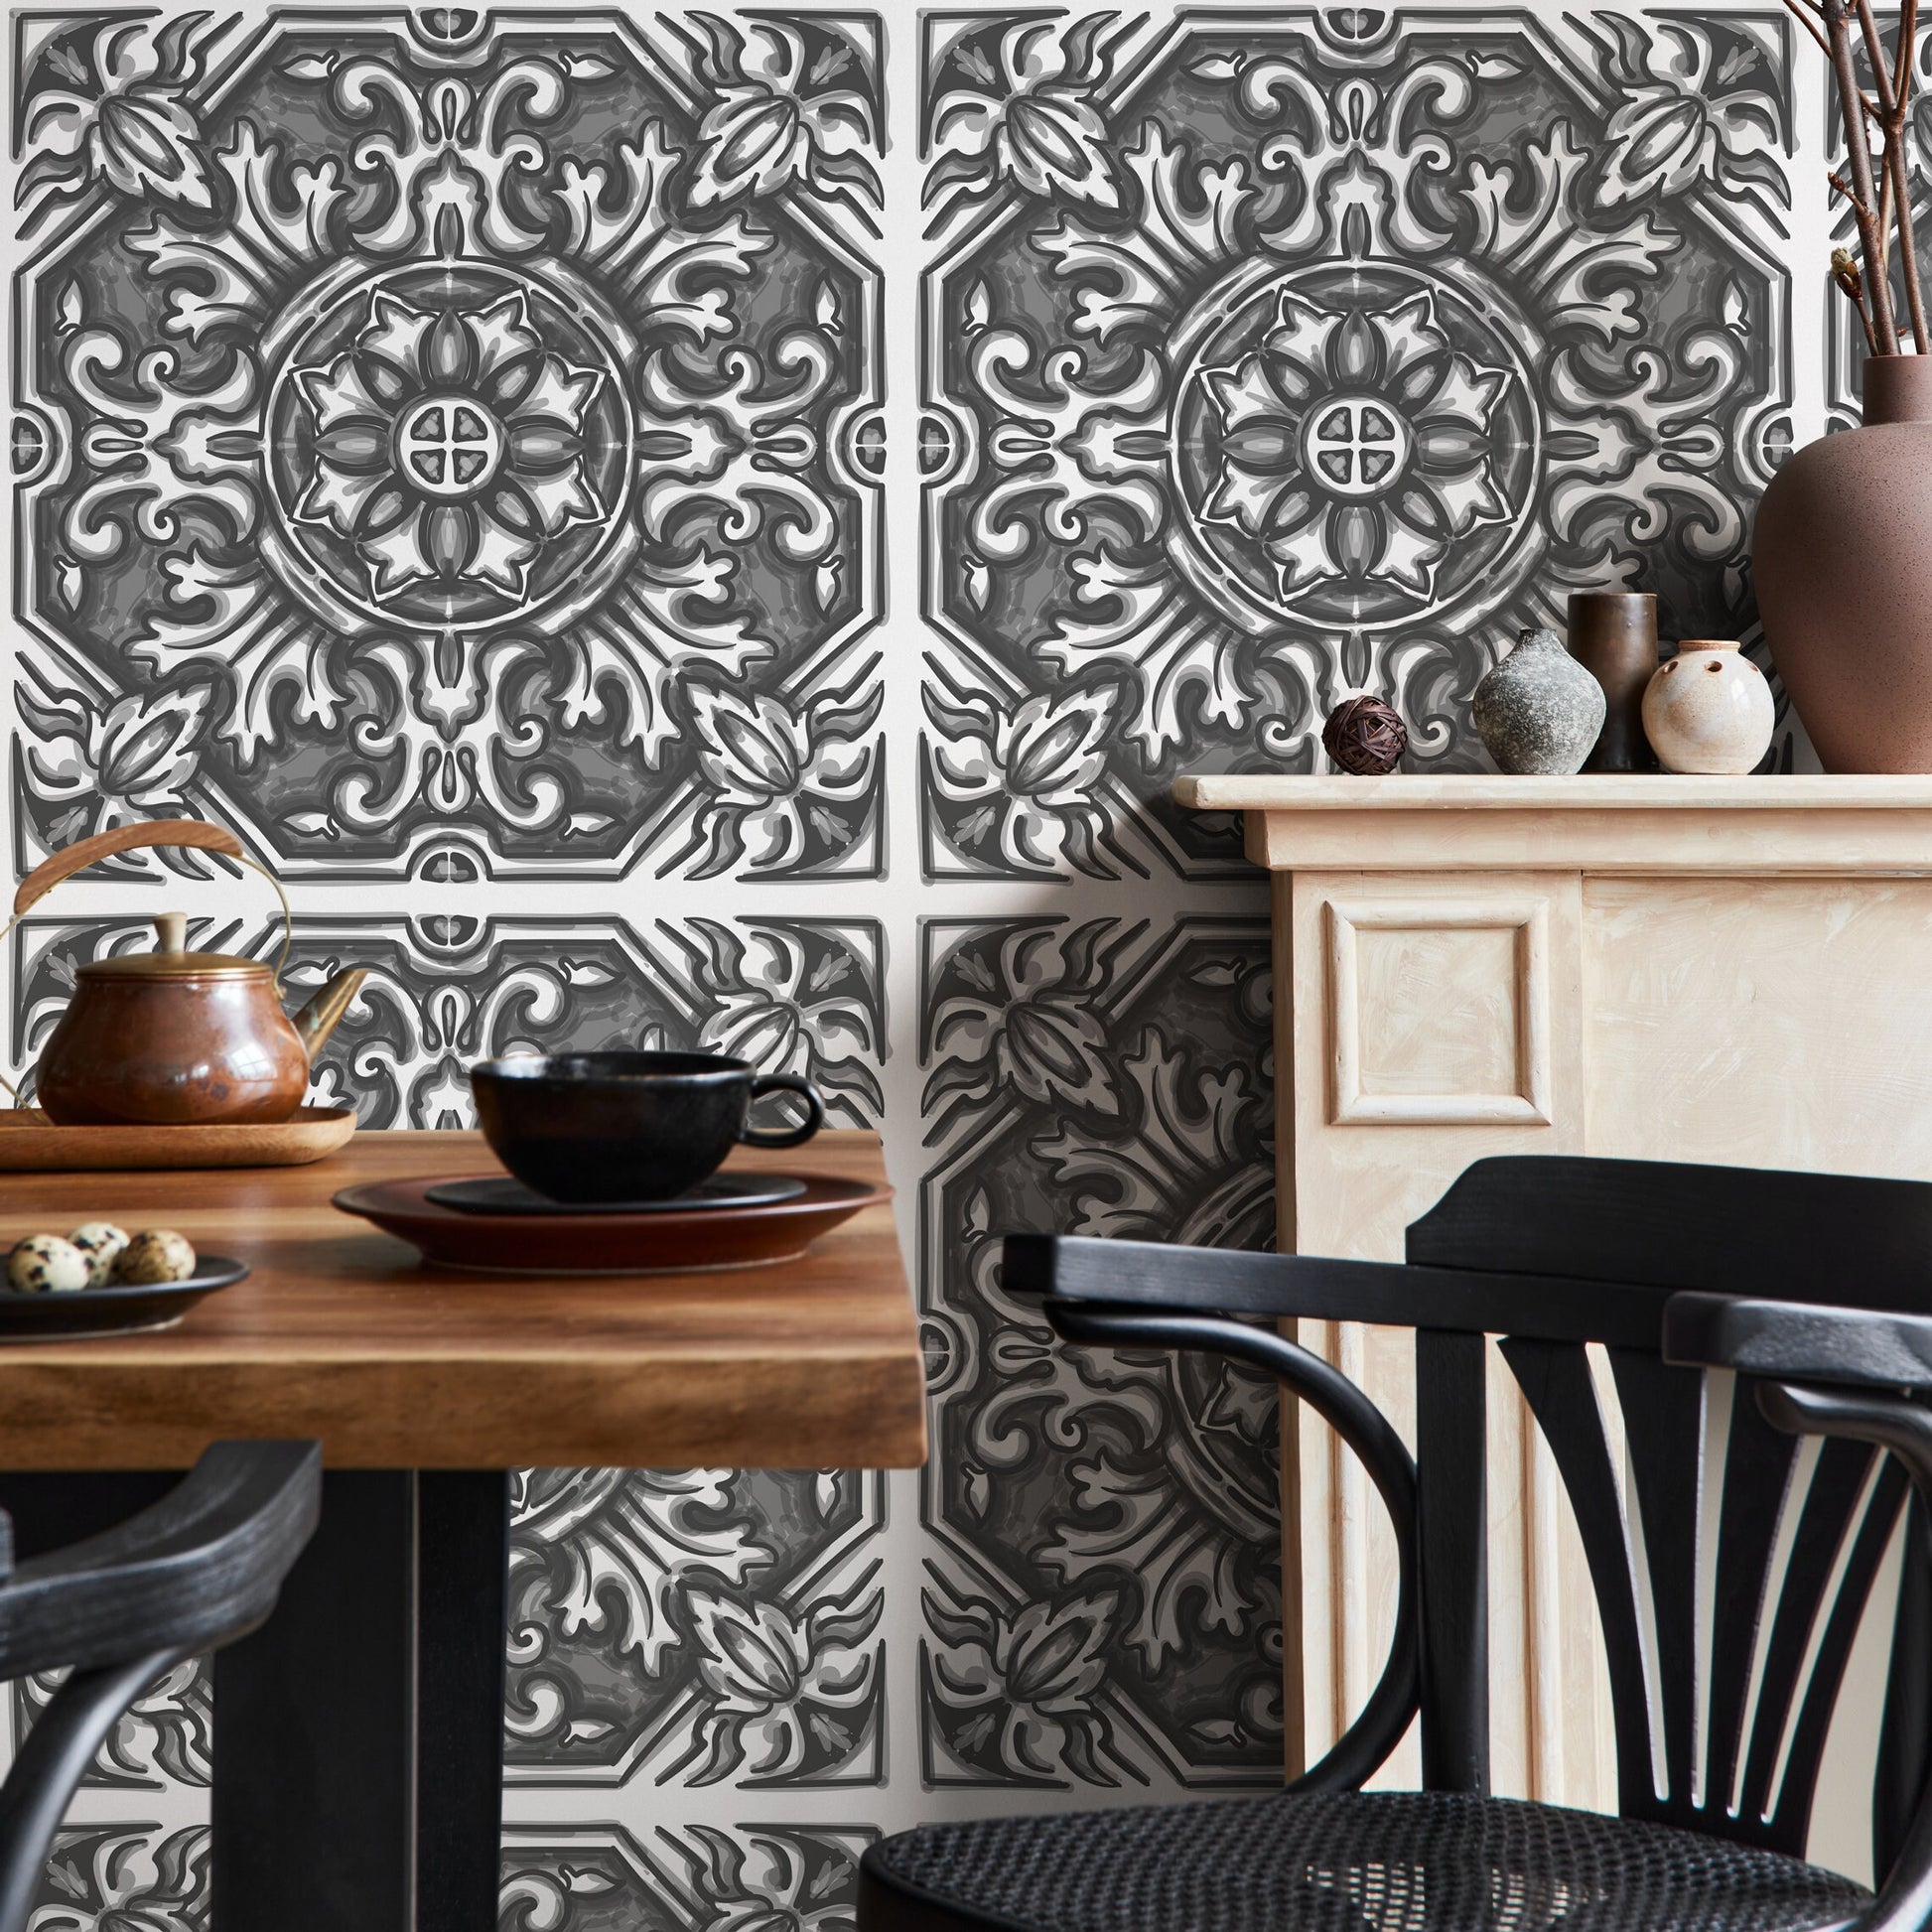 Removable Wallpaper Peel and Stick Wallpaper Wall Paper Wall Mural - Azulejos Tile Wallpaper - B148